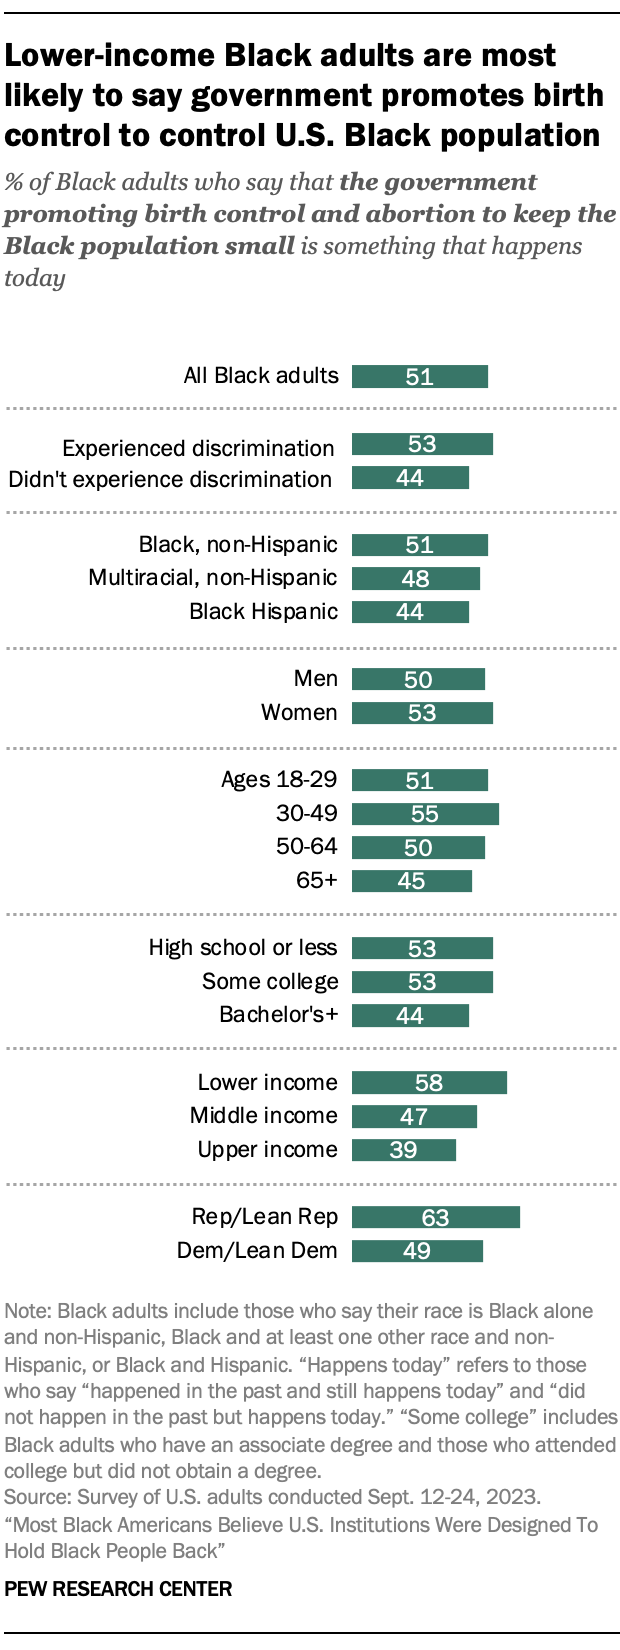 A bar chart showing that Lower-income Black adults are most likely to say government promotes birth control to control U.S. Black population